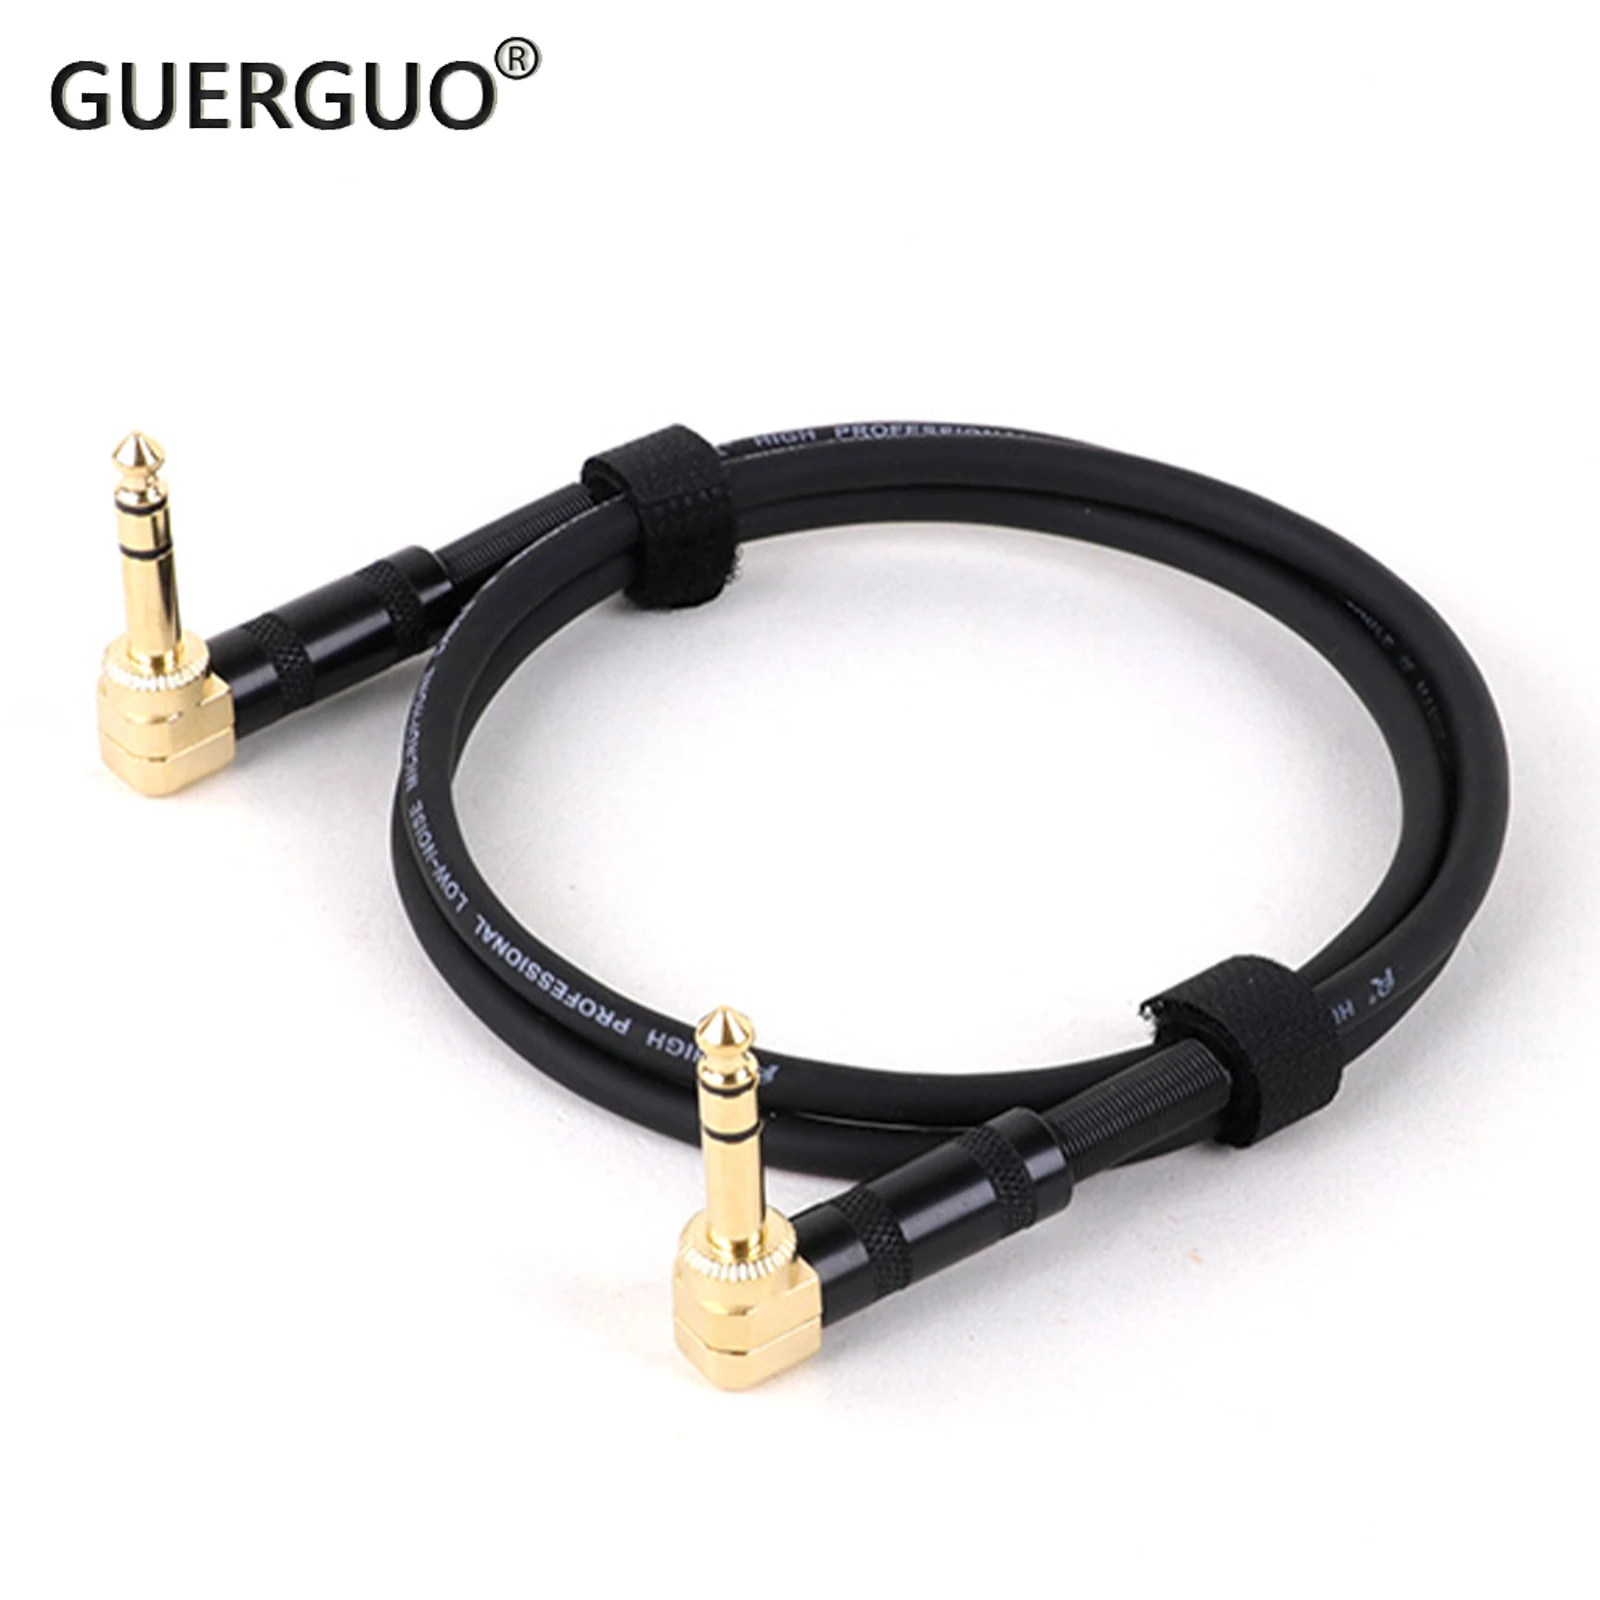 Gold Plate 6.35 Stereo Audio Balanced TRS 1/4 Angle to Angle Speaker Amplifier Cable for Guitar Keyboard‎ Dual Channel Cable 1PC